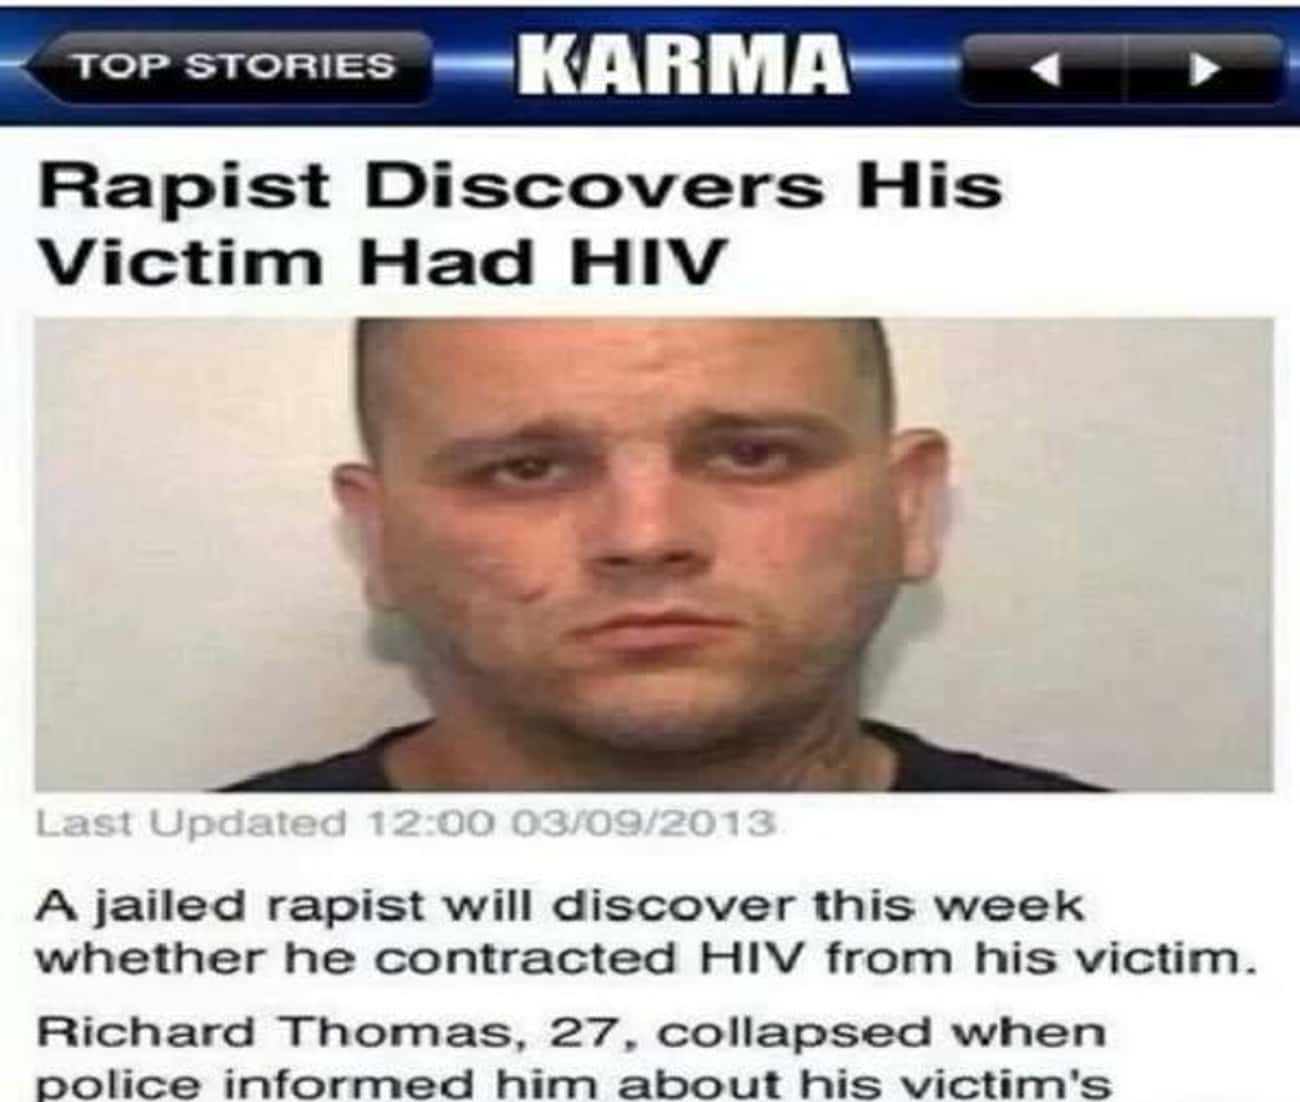 The Very Definition of Karma